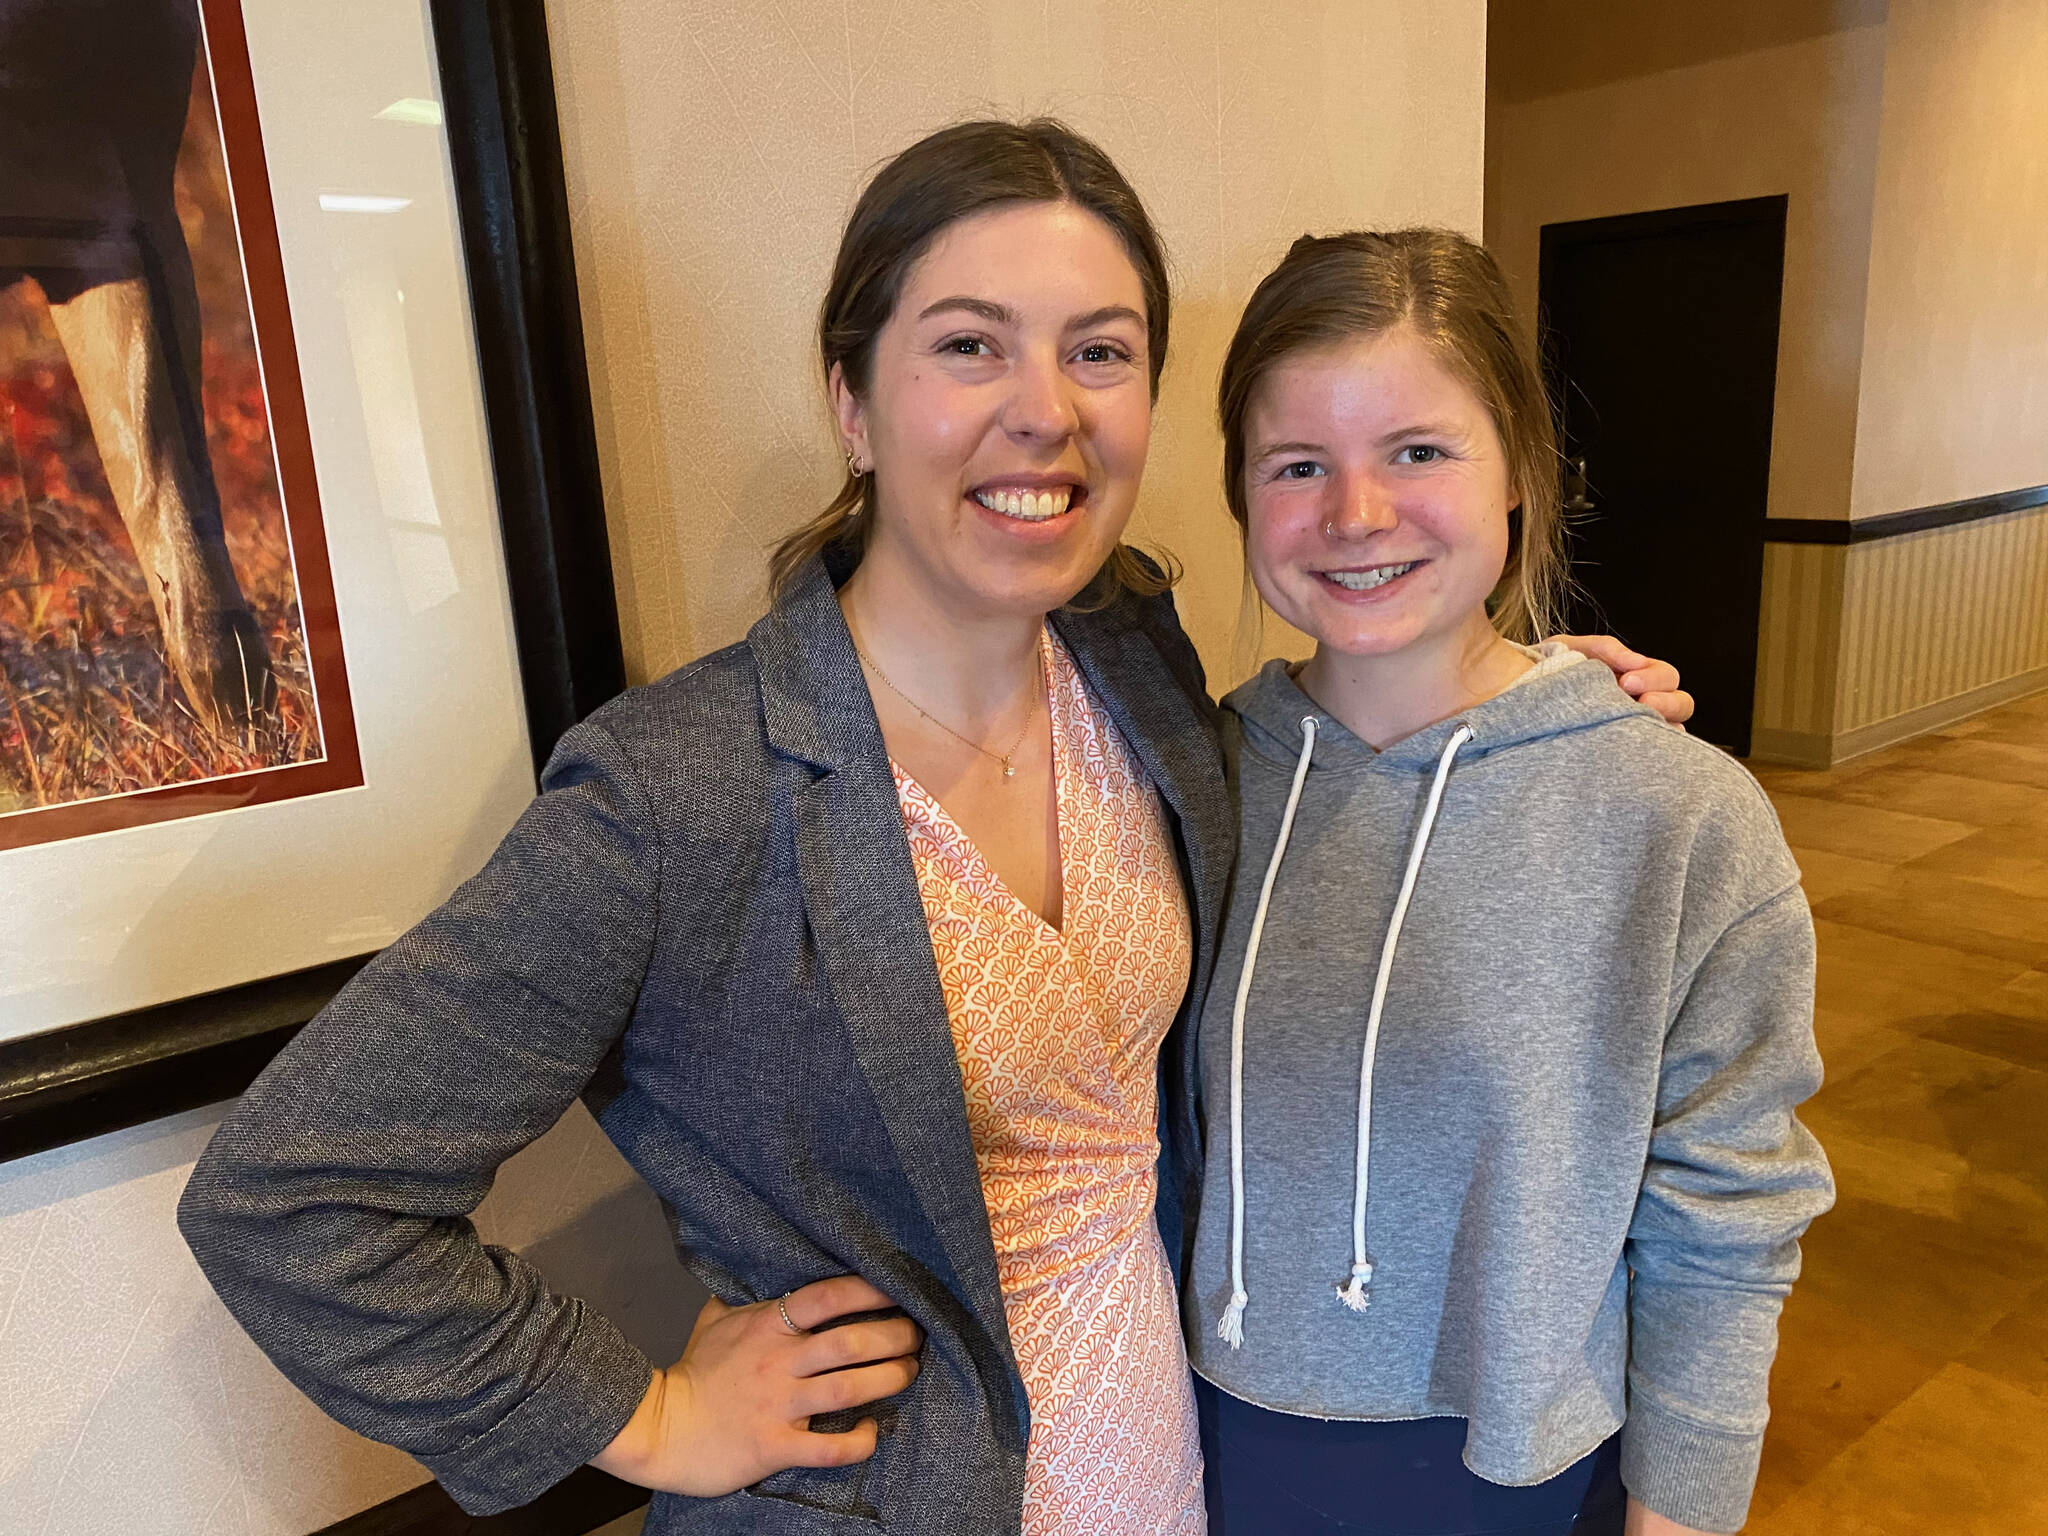 Izabelle Ith, left, stands with fellow 2023 ASAA Hall of Fame inductee Allie Ostrander, right on Sunday at the Hall of Fame induction ceremony in Anchorage, Sunday. (Courtesy Photo Tommy Thompson)